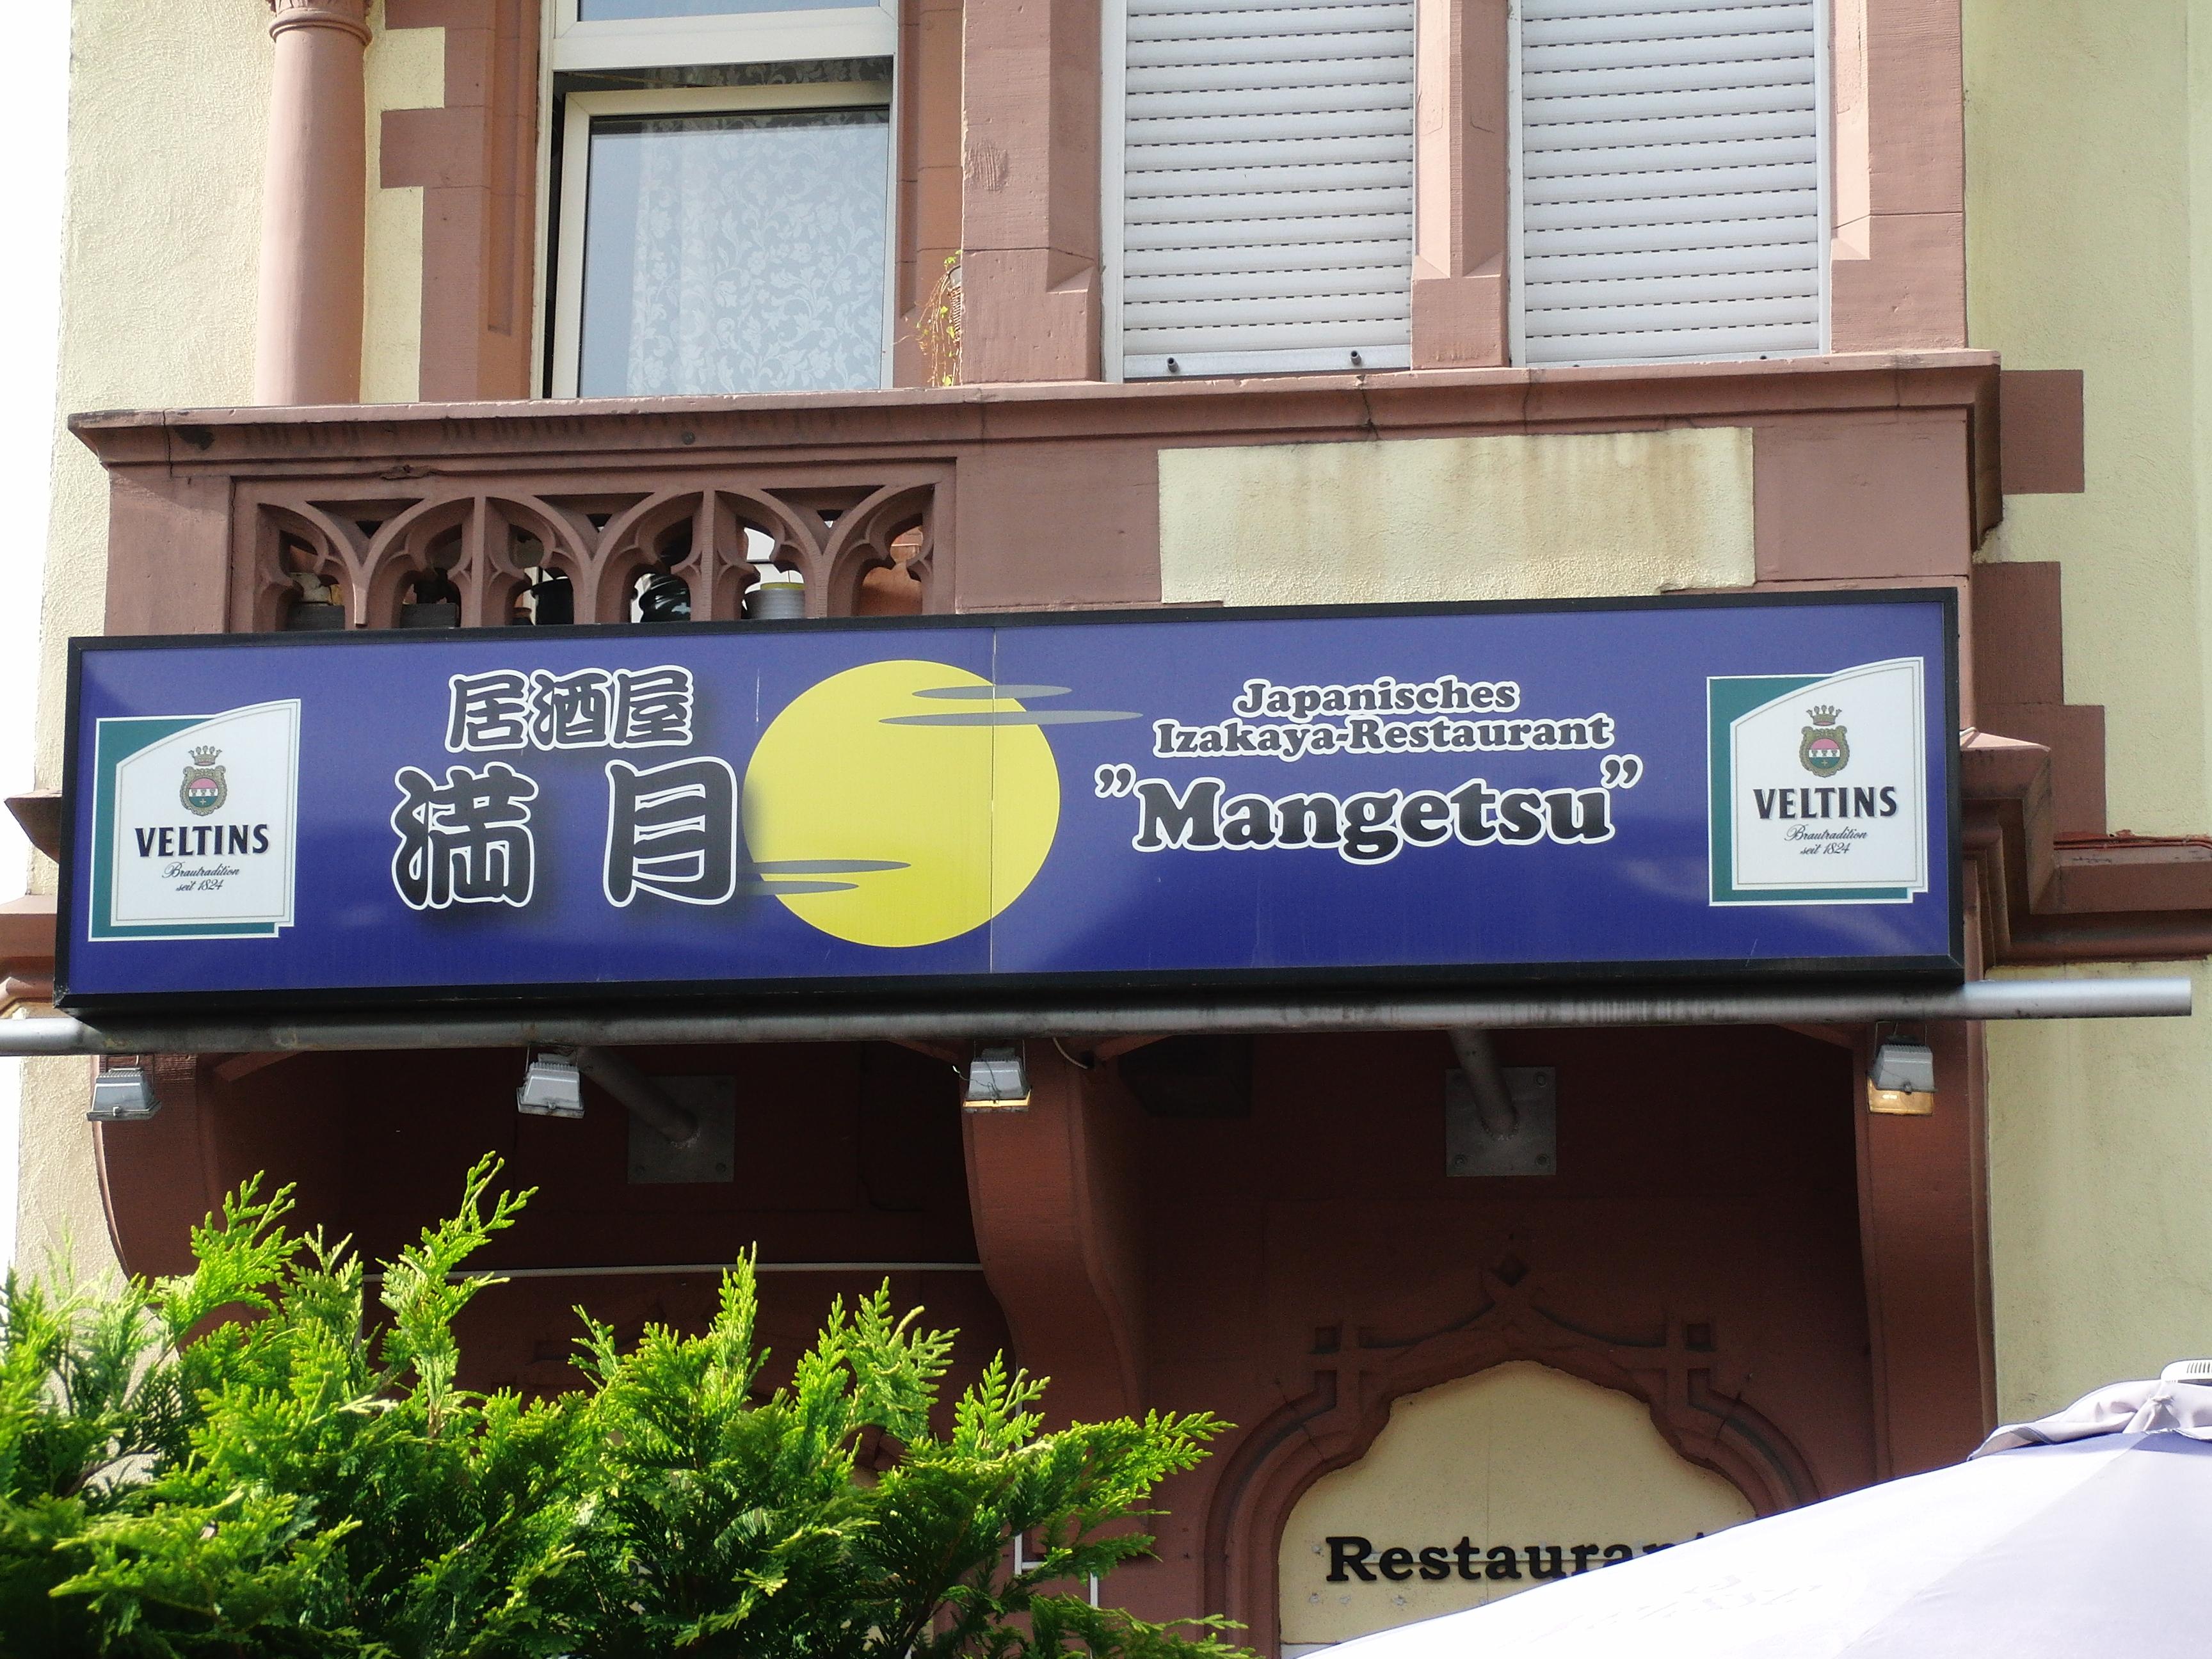 Cover image of this place Mangetsu